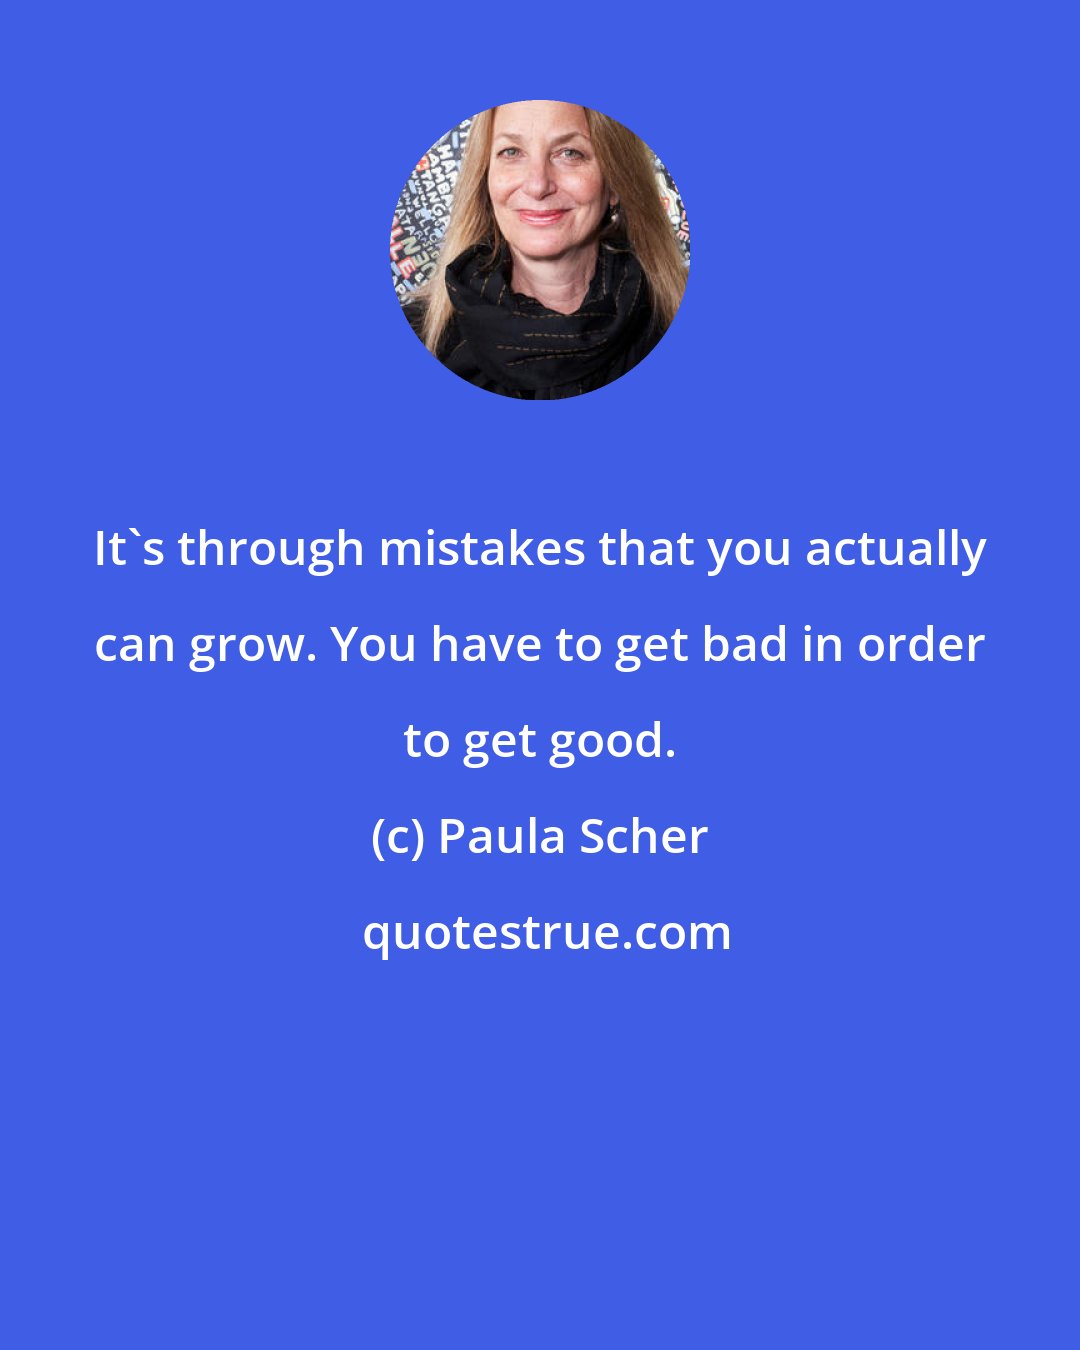 Paula Scher: It's through mistakes that you actually can grow. You have to get bad in order to get good.